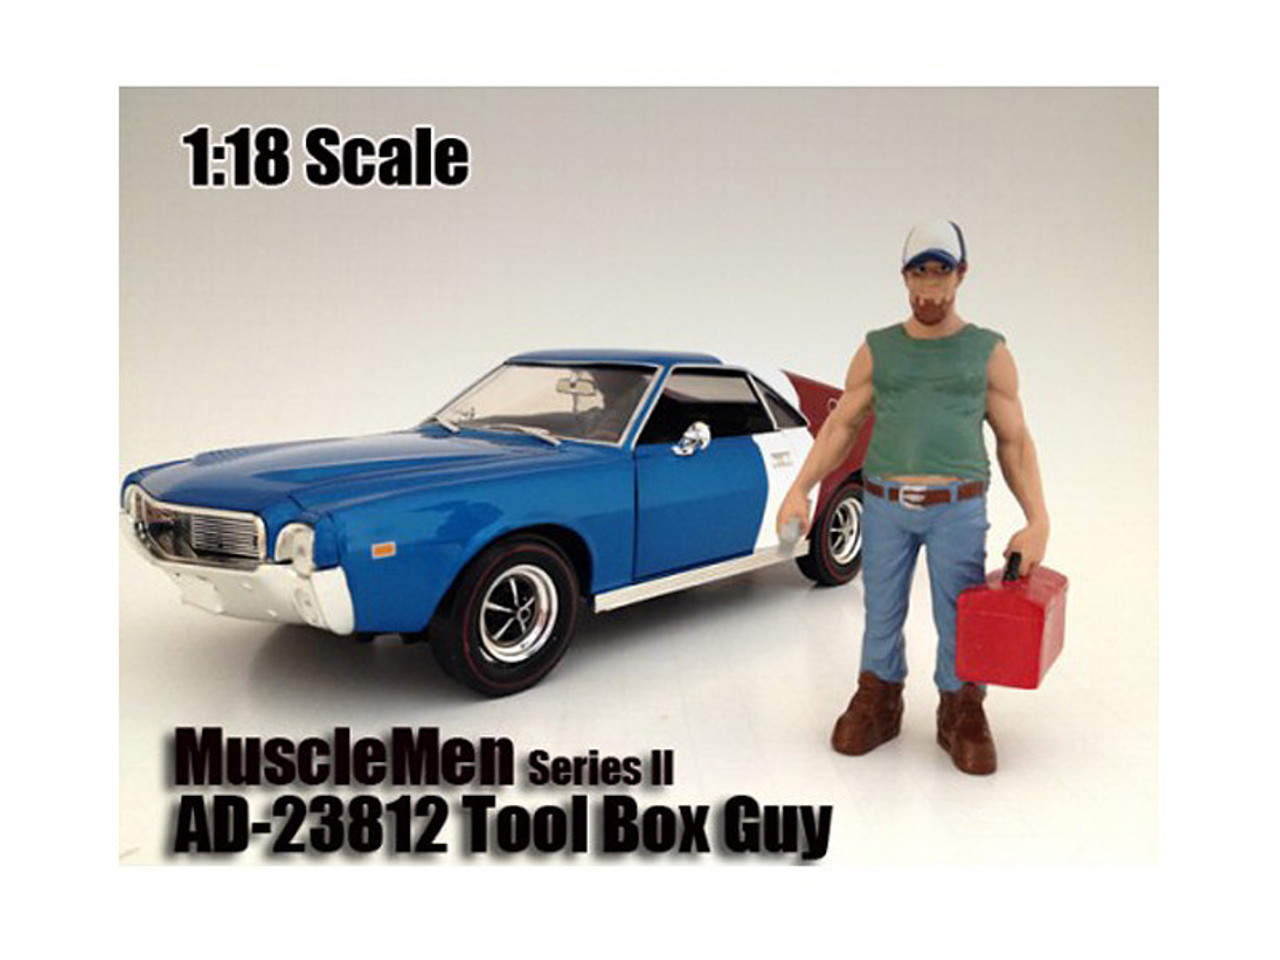 Musclemen "Tool Box Guy" Figure For 1/18 Scale Models by American Diorama